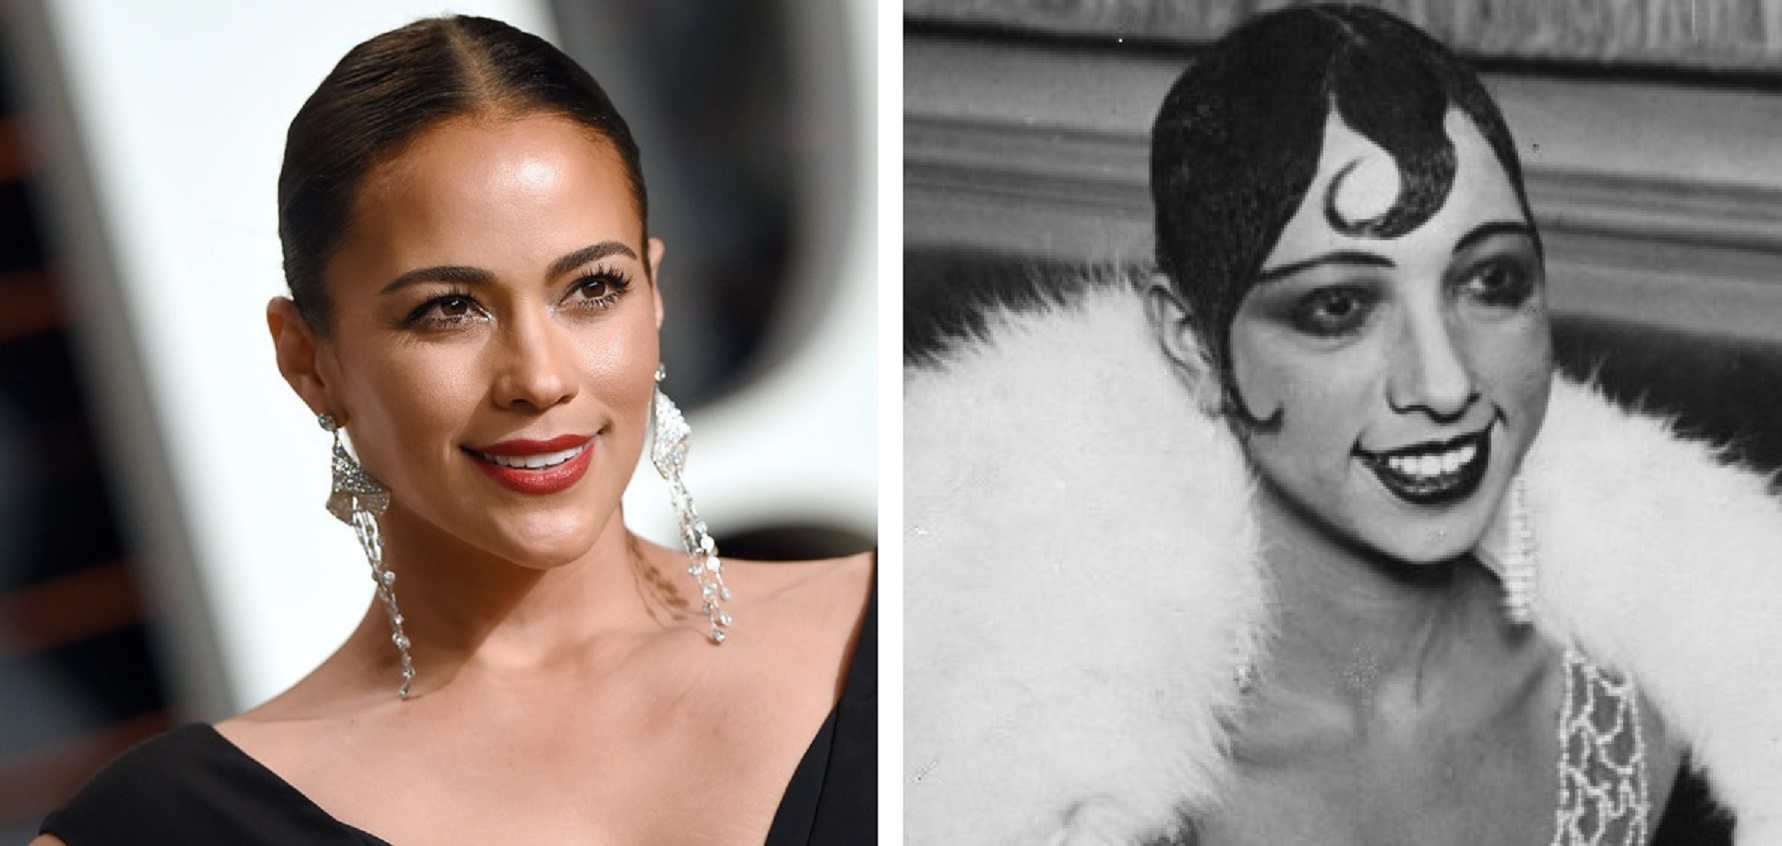 Paula Patton To Play Josephine Baker in Upcoming Biopic About the Iconic Entertainer